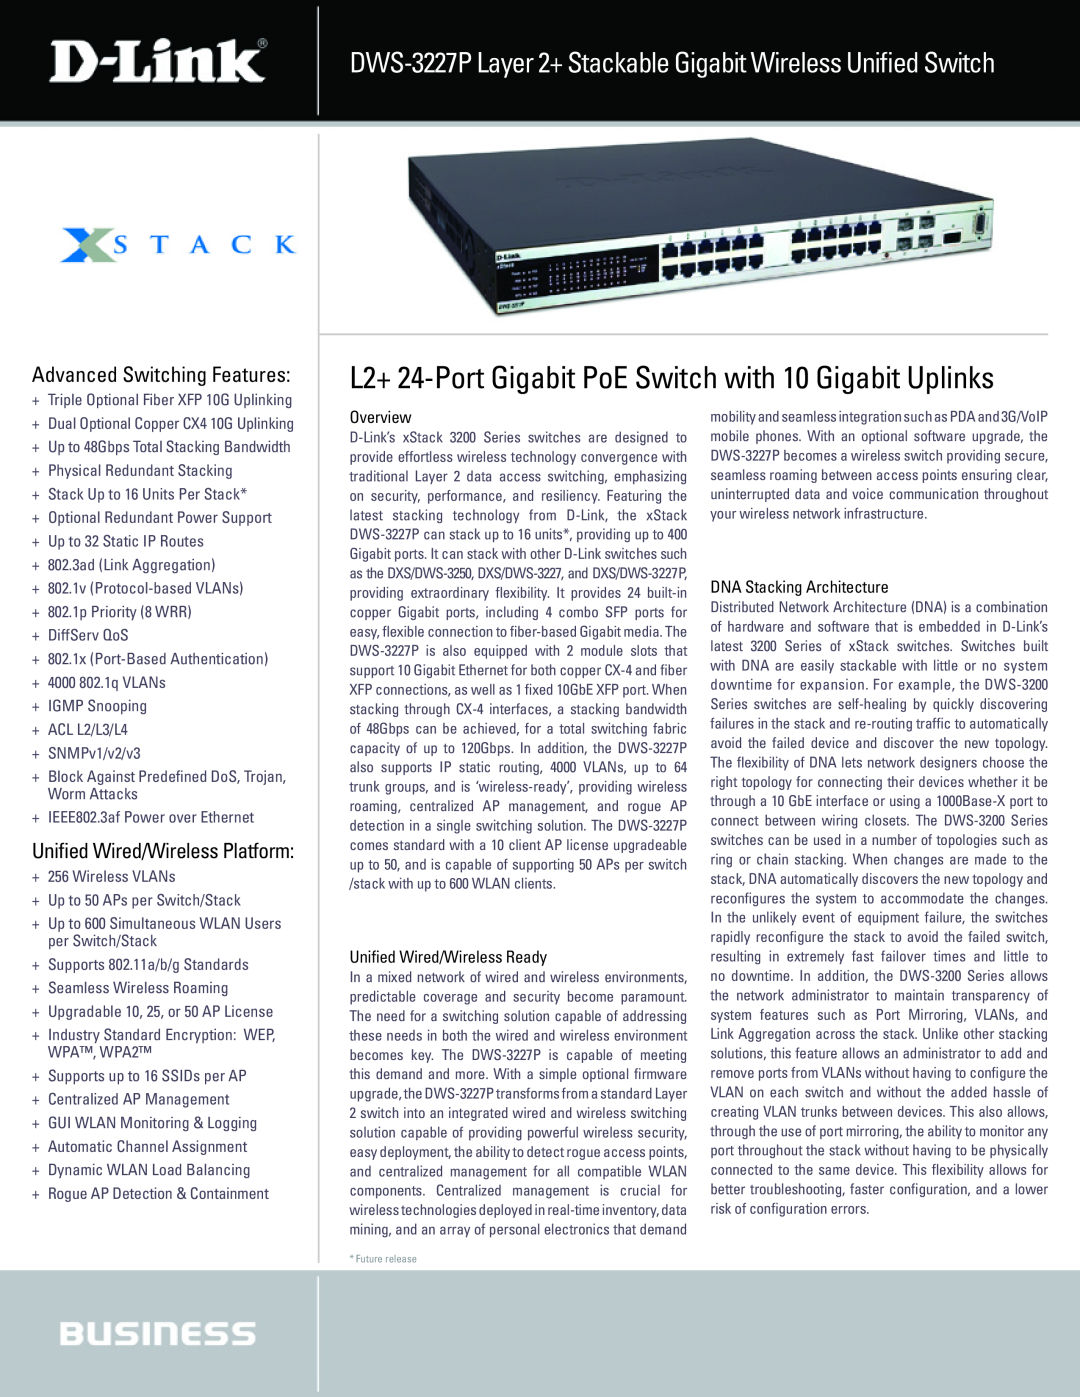 D-Link DWS-3227 manual L2+ 24-Port Gigabit PoE Switch with 10 Gigabit Uplinks, Advanced Switching Features 